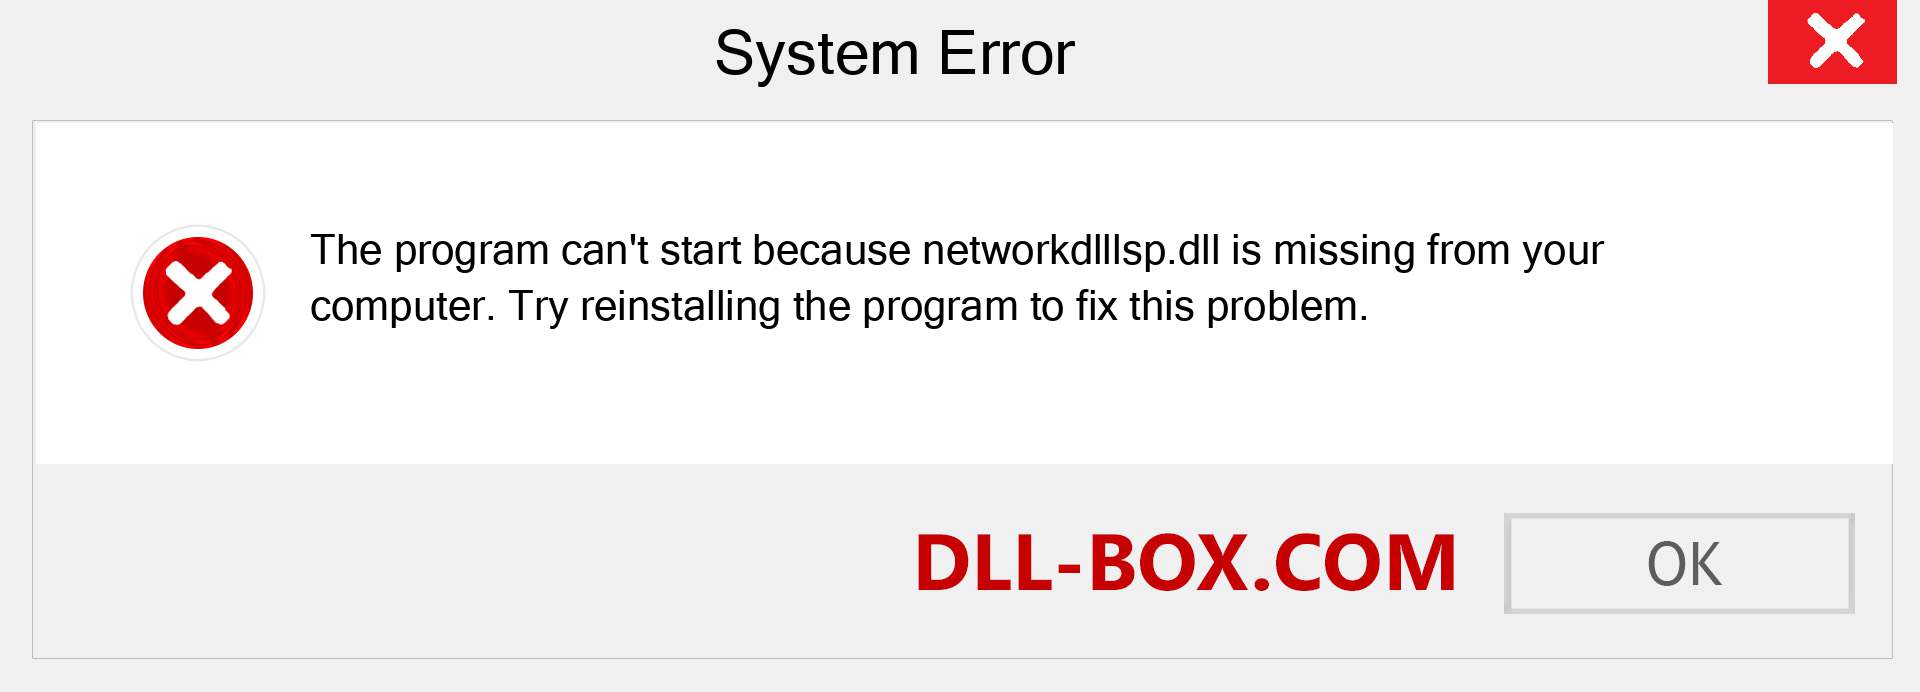  networkdlllsp.dll file is missing?. Download for Windows 7, 8, 10 - Fix  networkdlllsp dll Missing Error on Windows, photos, images